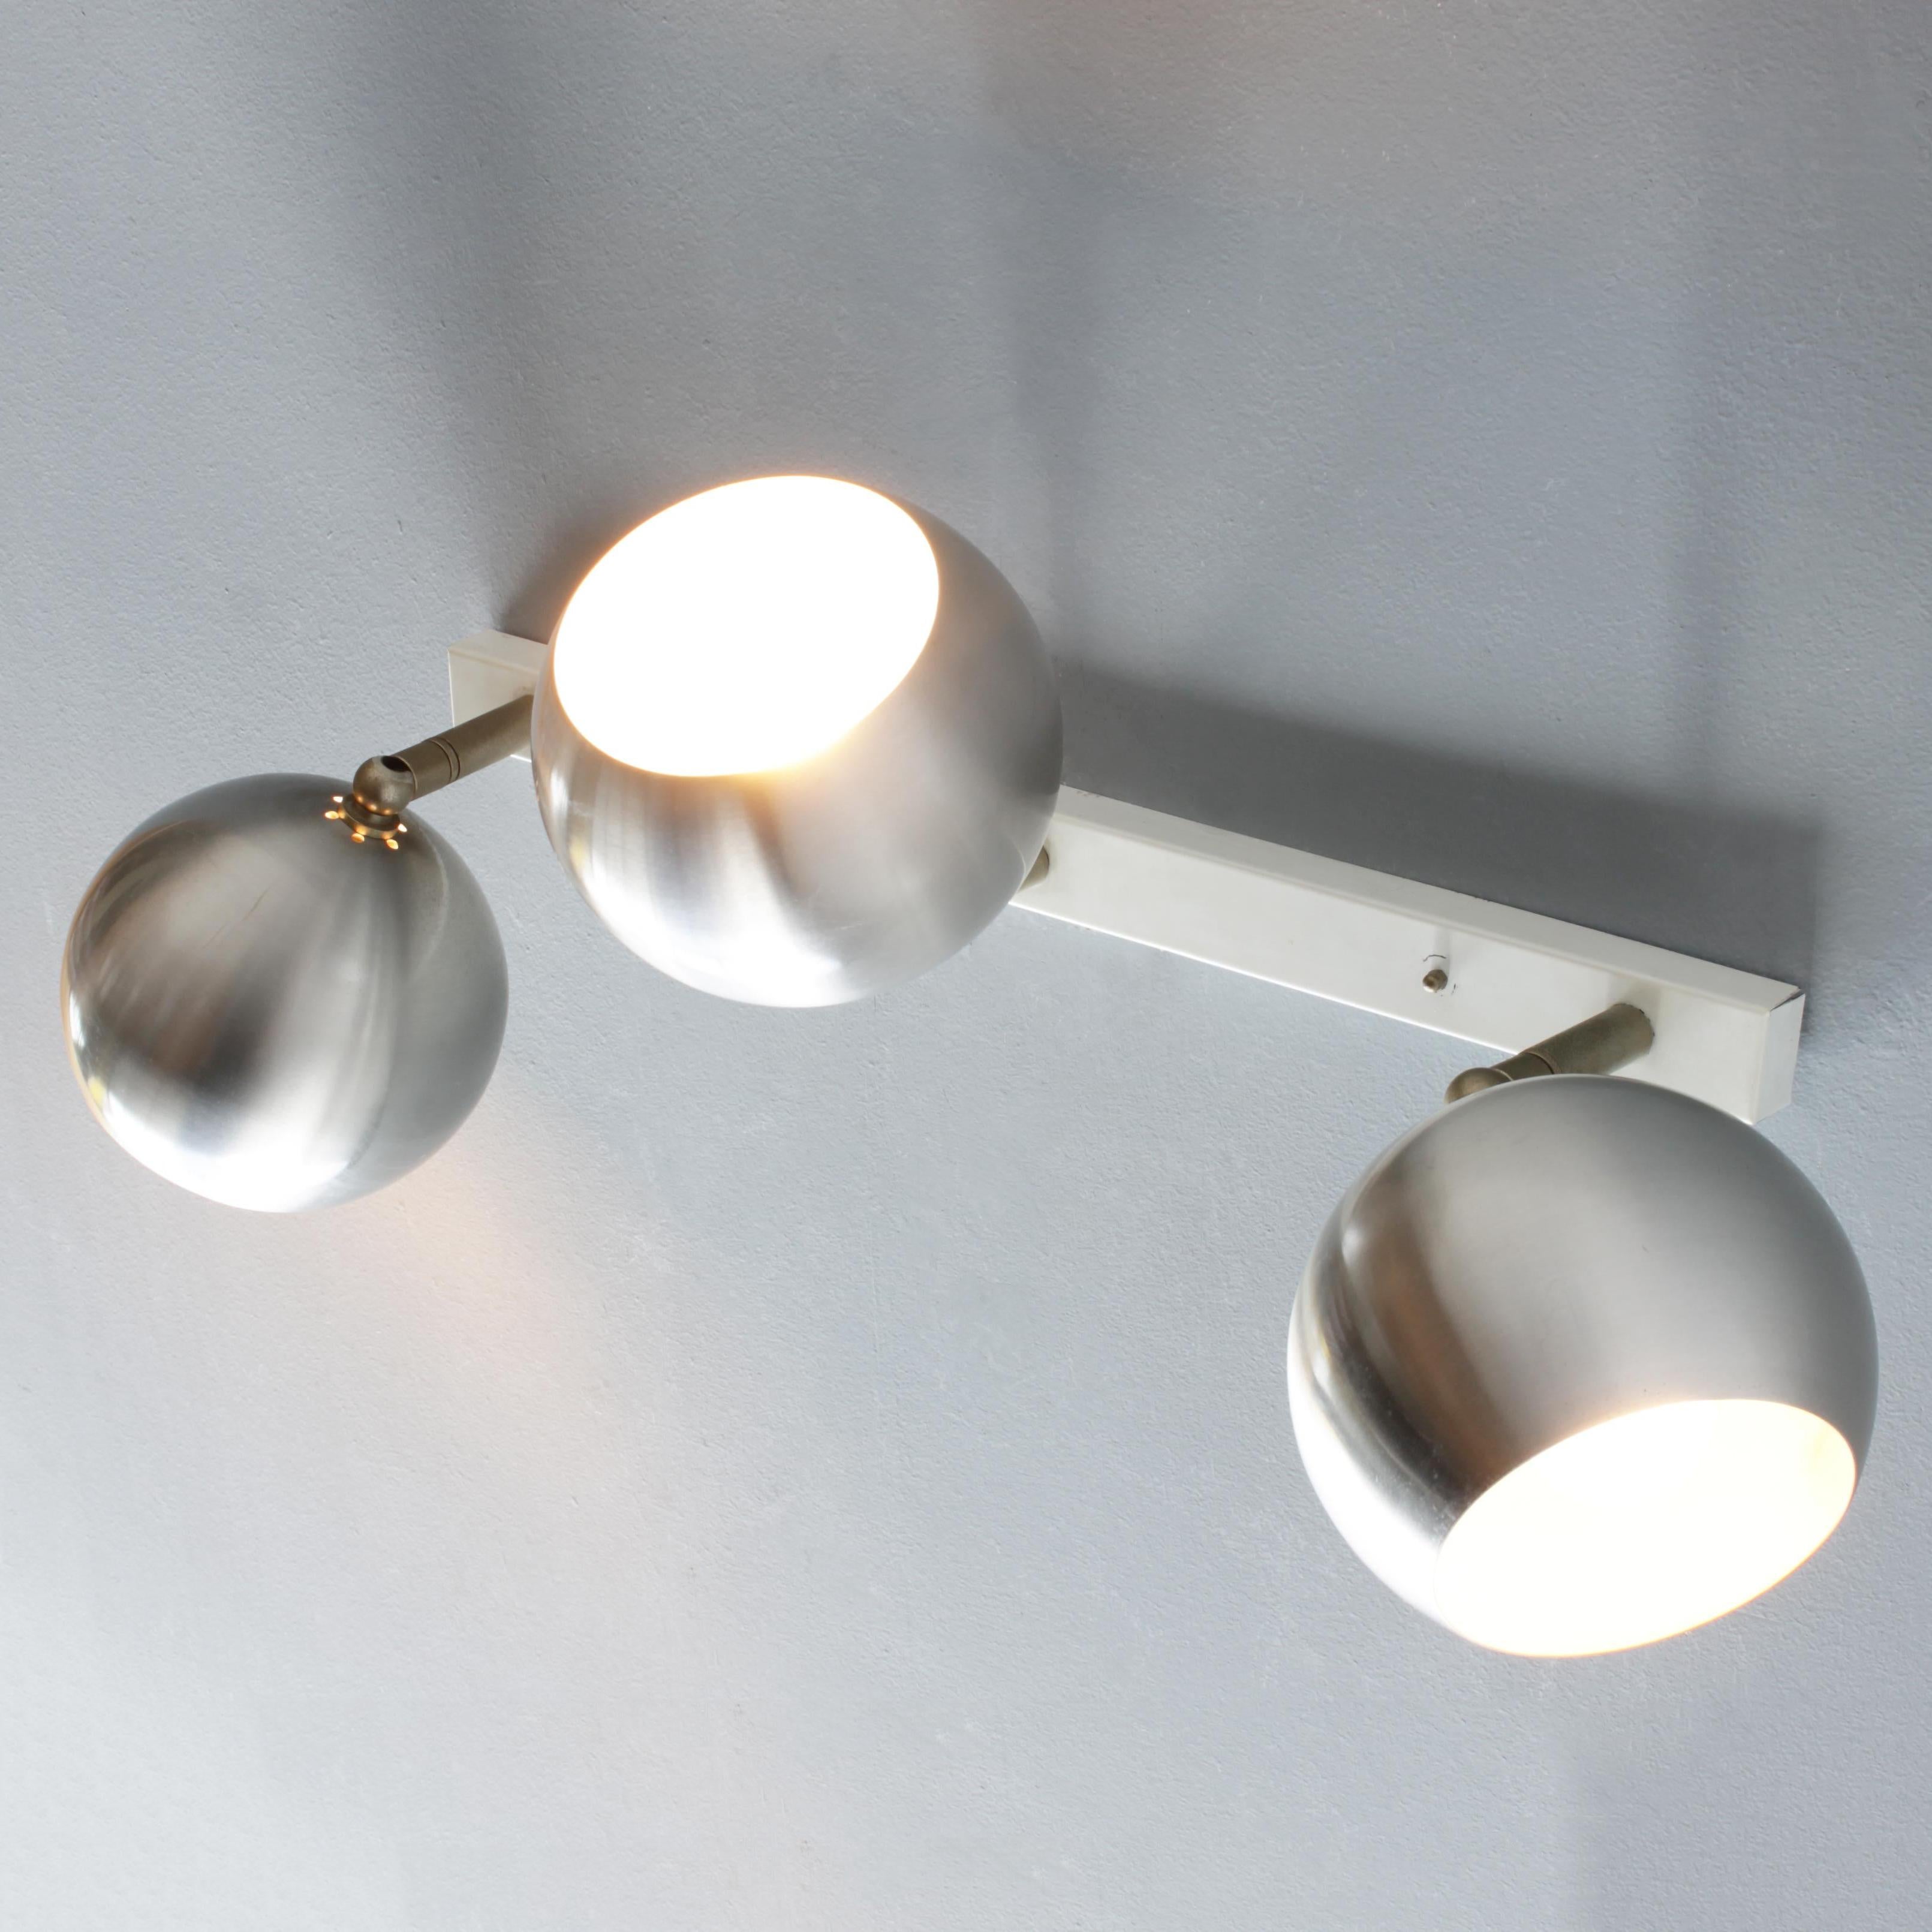 Dutch modernist three light wall or ceiling fixture by RAAK. Period 1960-65. Three spotlights in brushed aluminum and nickel on a lacquered metal rail. Marked with a label.
The fixture is equipped with the original, regular (E26-E27) Edison screw